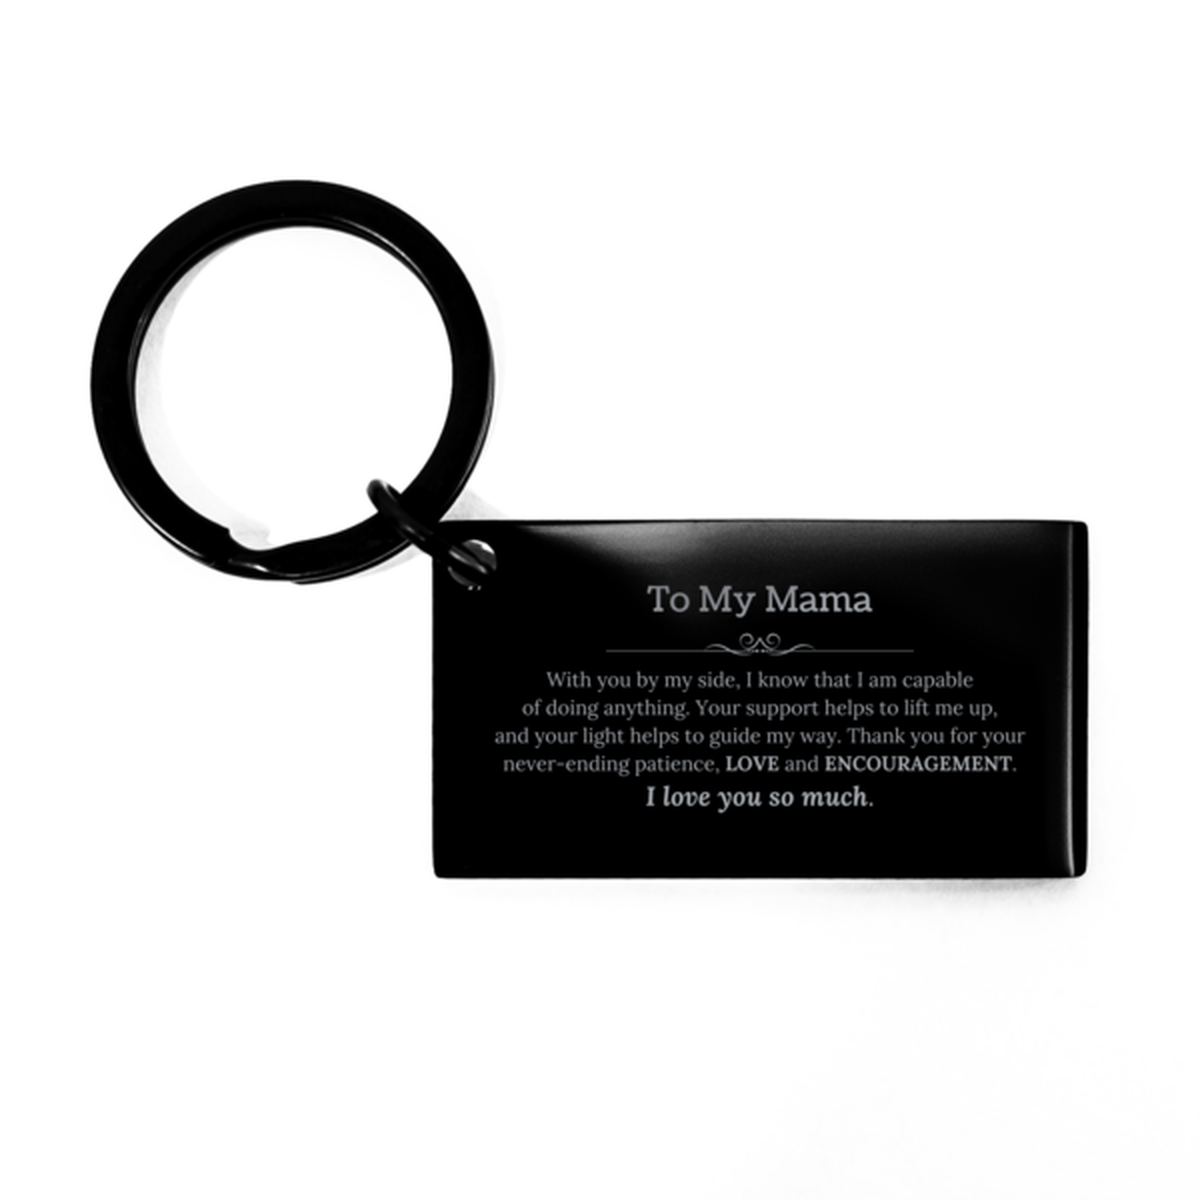 Appreciation Mama Keychain Gifts, To My Mama Birthday Christmas Wedding Keepsake Gifts for Mama With you by my side, I know that I am capable of doing anything. I love you so much